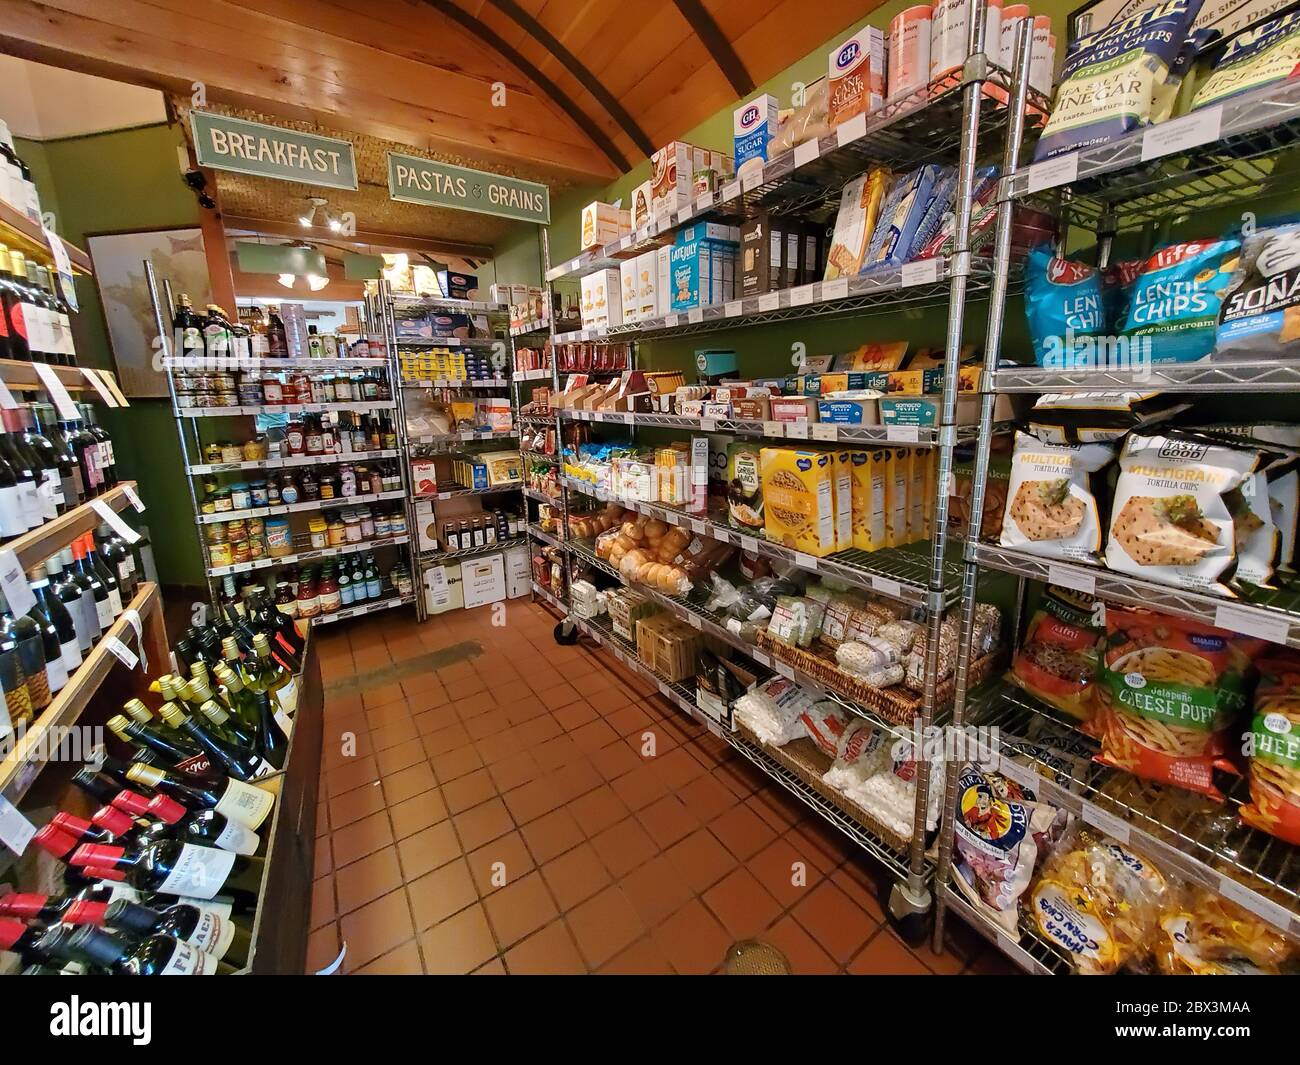 Products are on display at Tutu's in Lafayette, California, a restaurant which has adopted a general store model selling groceries and supplies during an outbreak of COVID-19 coronavirus, April 14, 2020. () Stock Photo